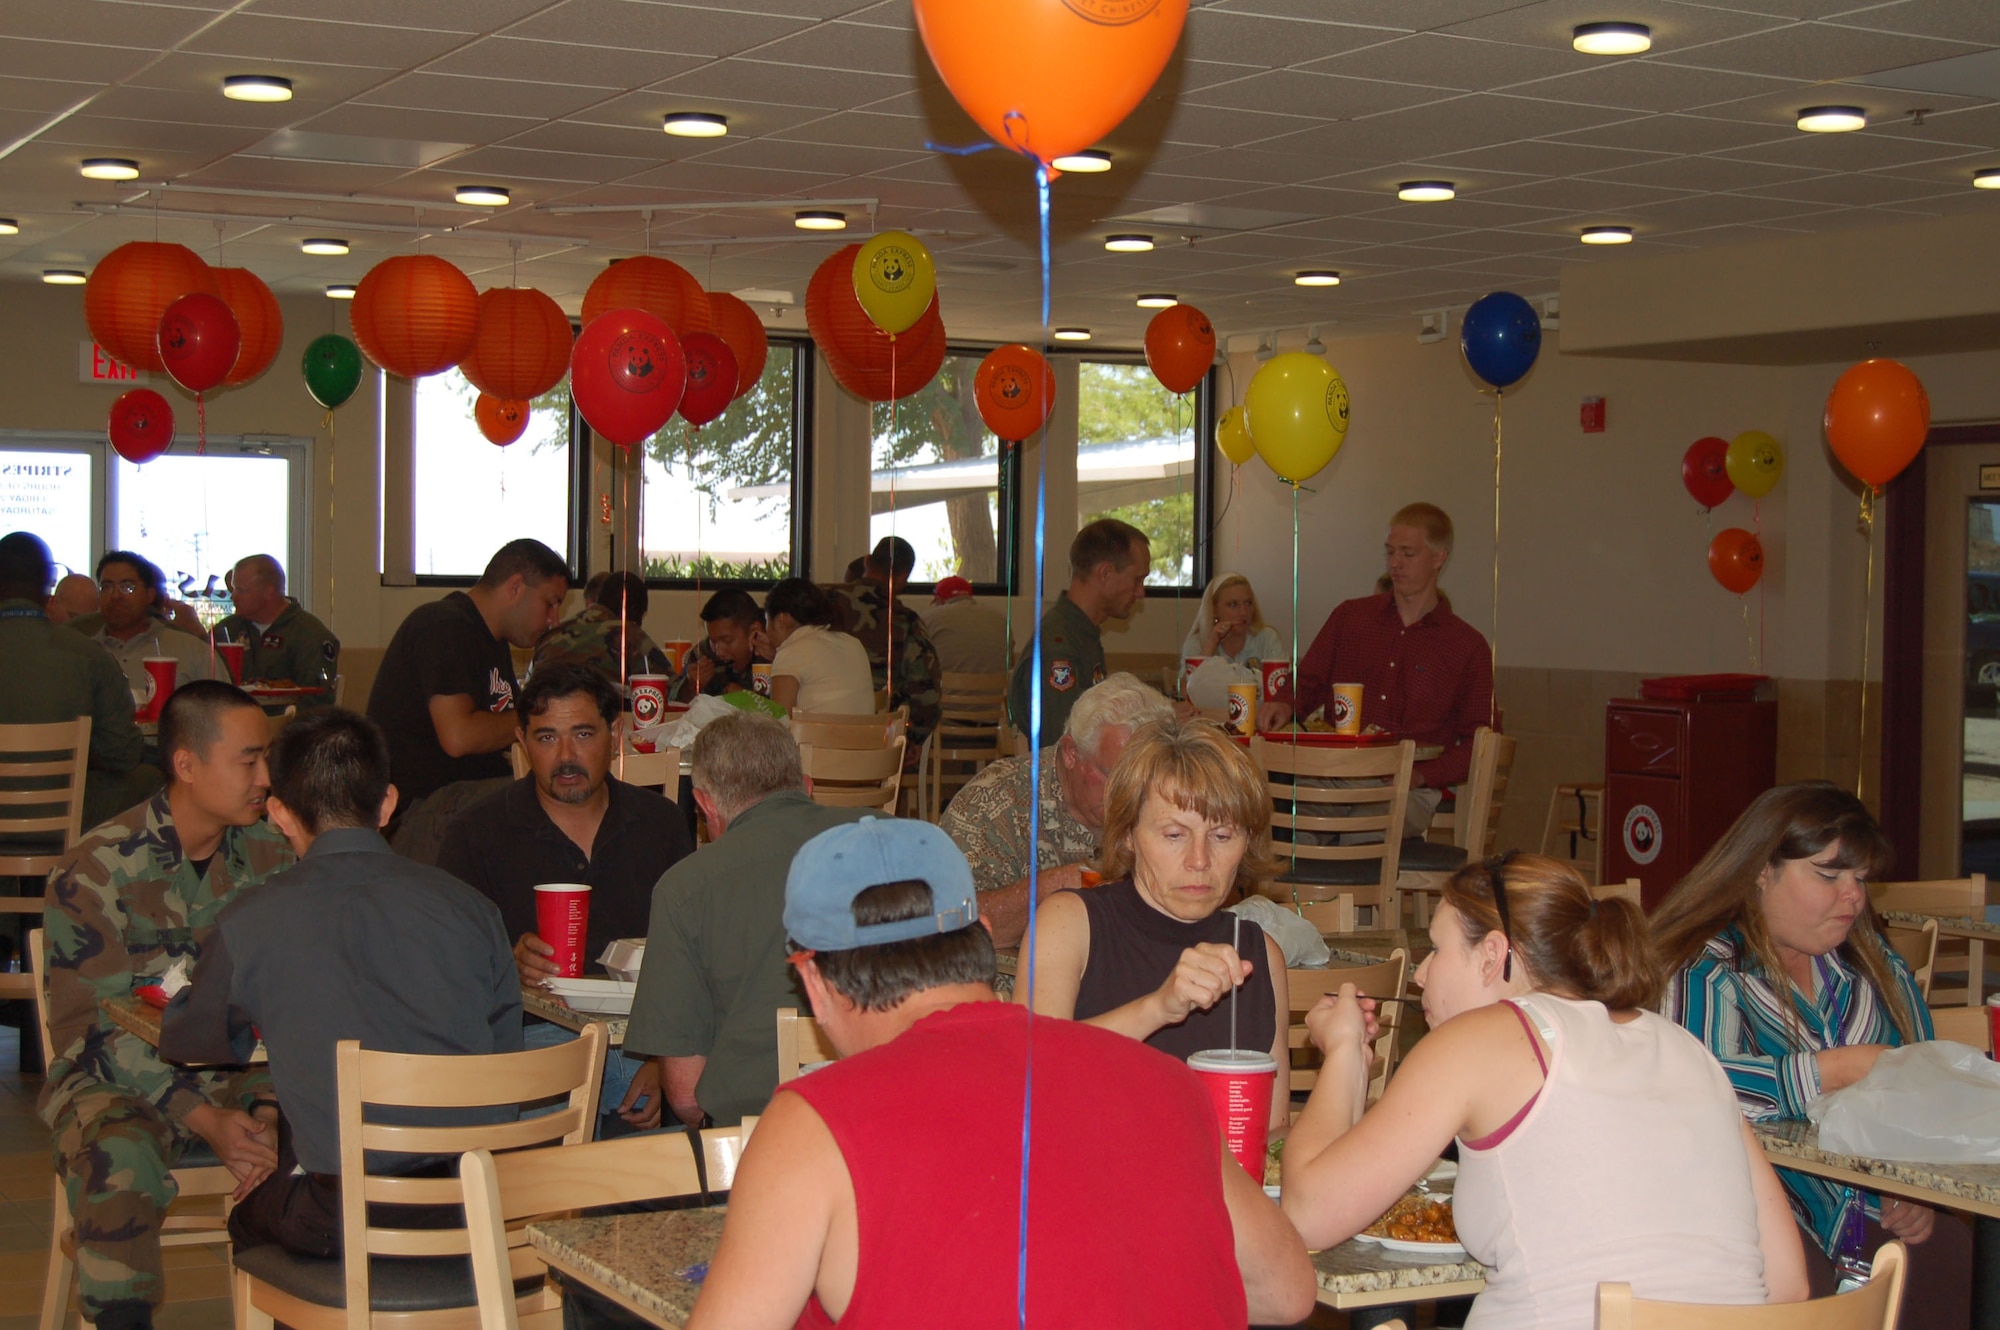 Panda Express offered free lunch to 100 family members of deployed personnel during the restaurant's grand opening here July 5, 2006.  (Photo by Airman 1st Class Julius Delos Reyes)